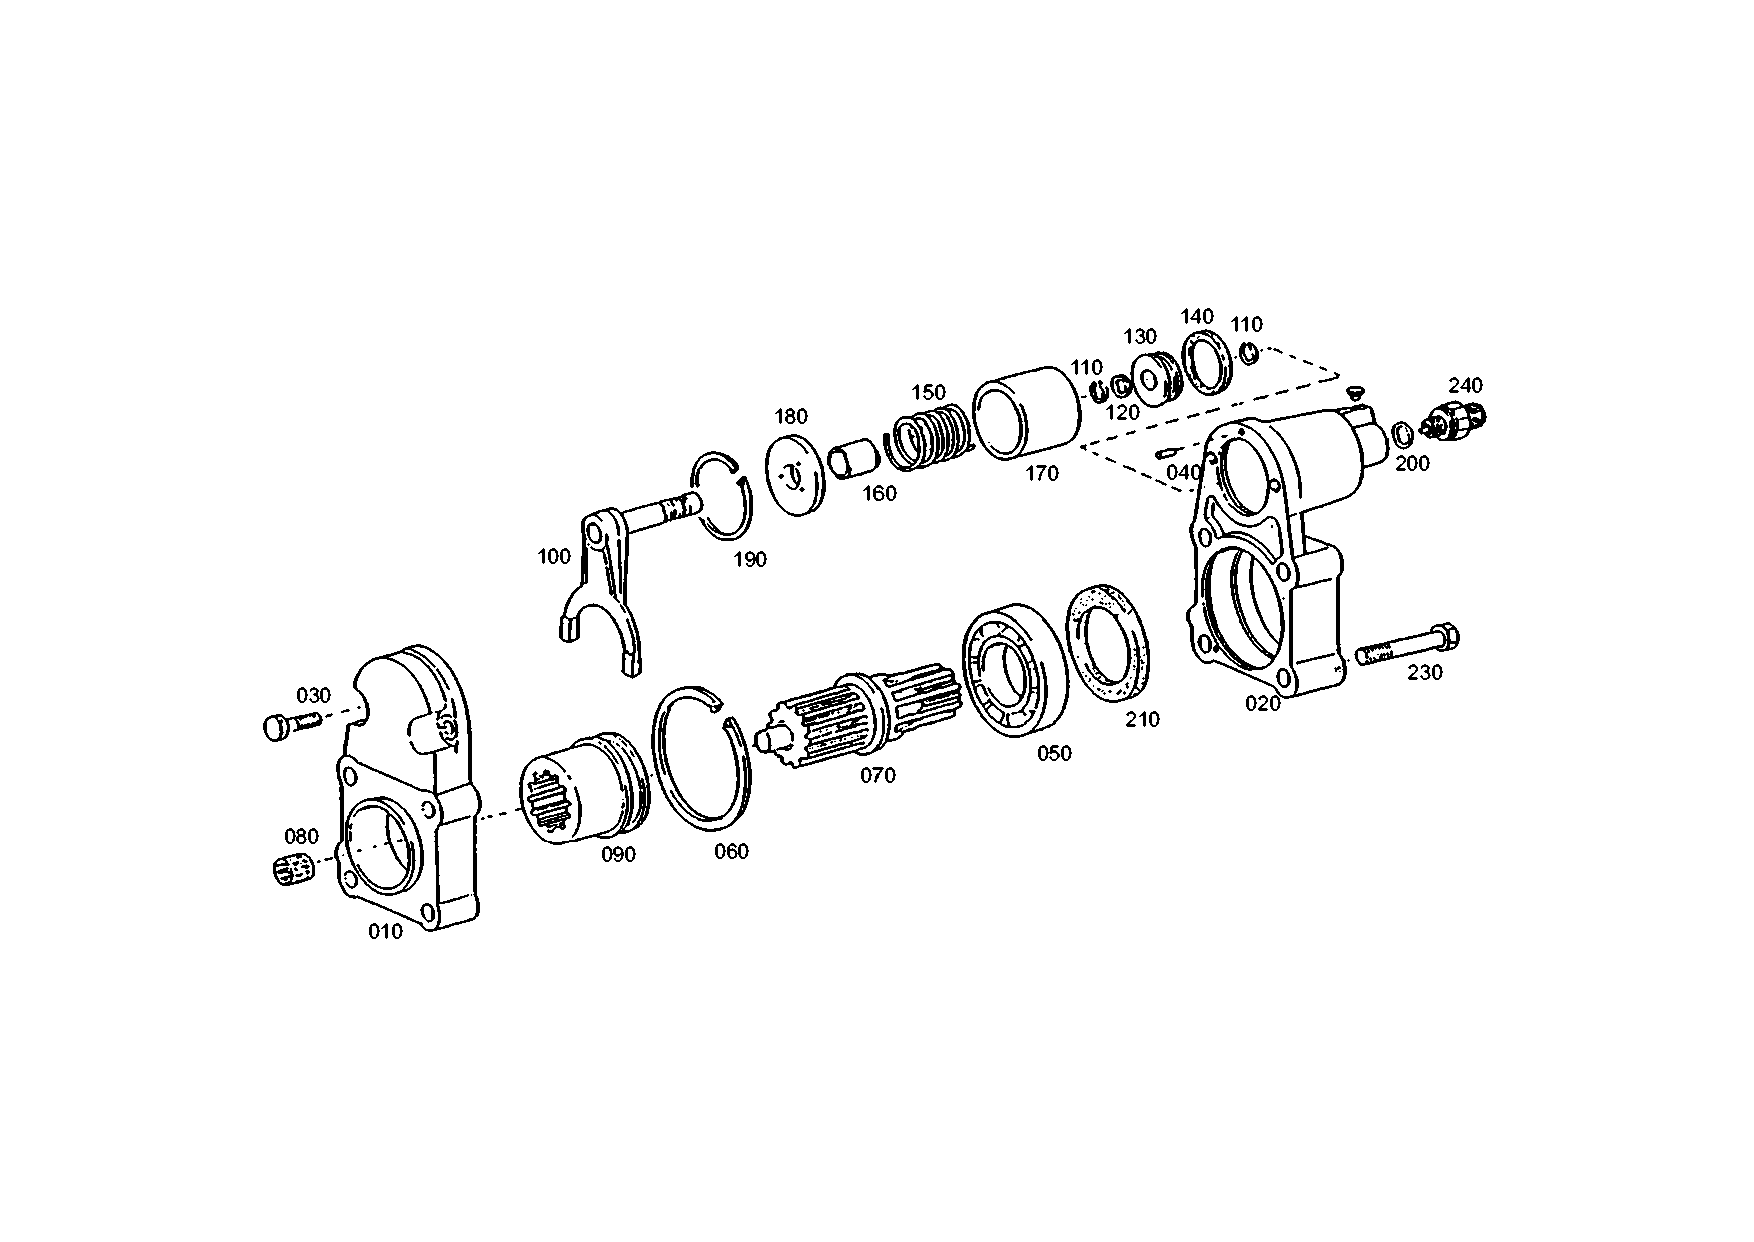 drawing for LUNA EQUIPOS INDUSTRIEALES, S.A. 199014250122 - BUSH (figure 4)